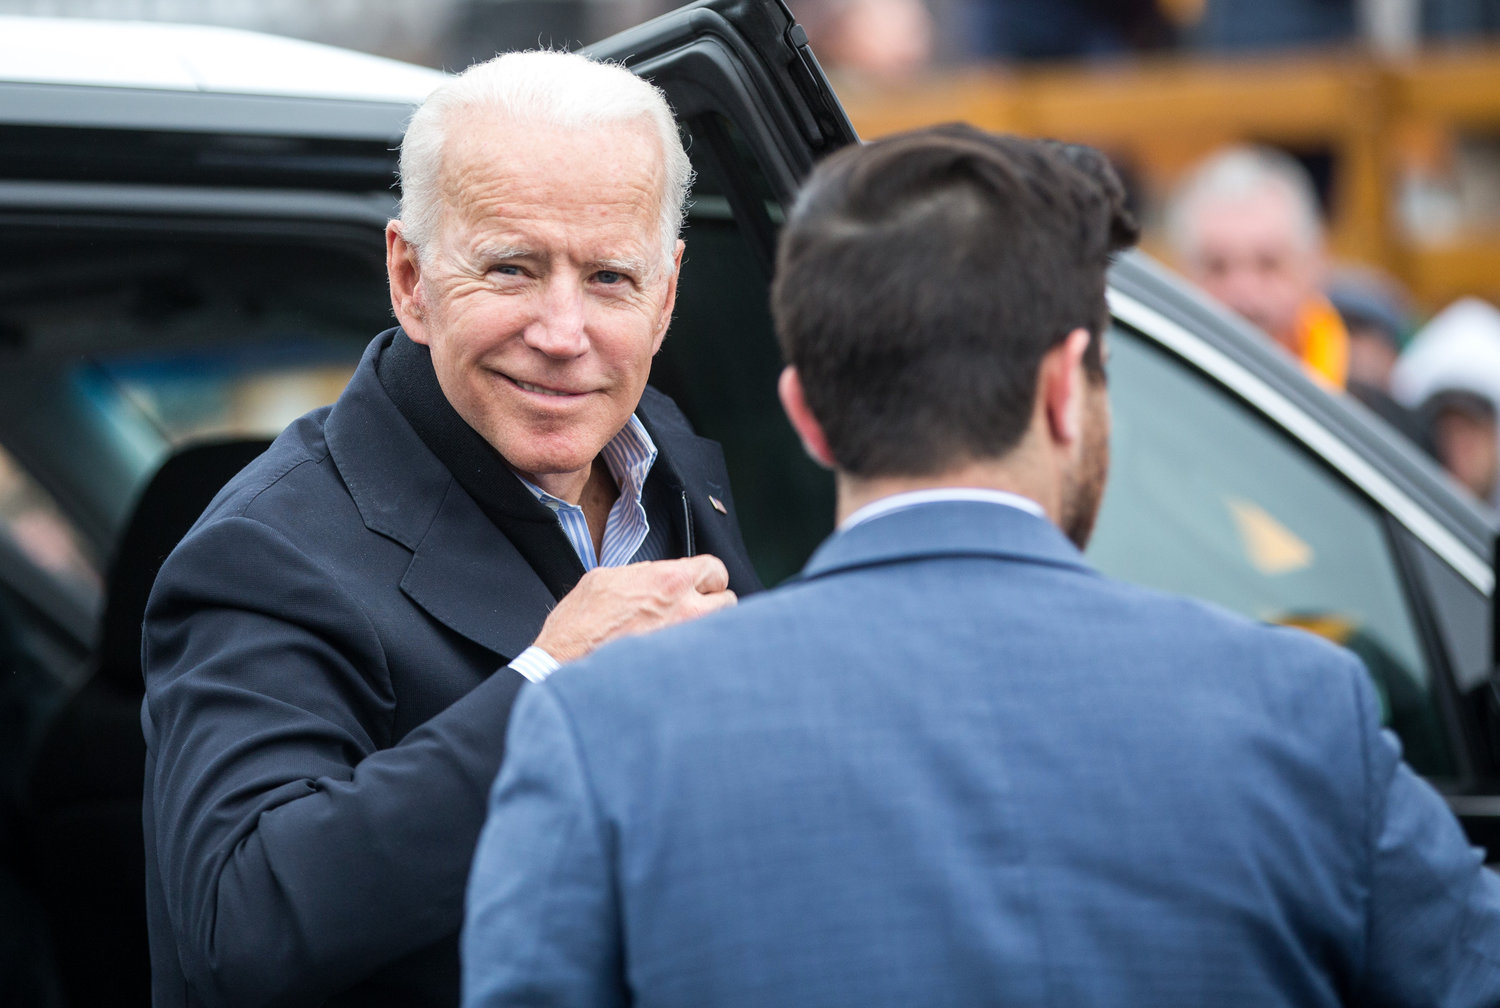 Former Vice President Joe Biden arrives in front of a Stop & Shop in support of striking union workers on April 18, in Dorchester, Massachusetts.